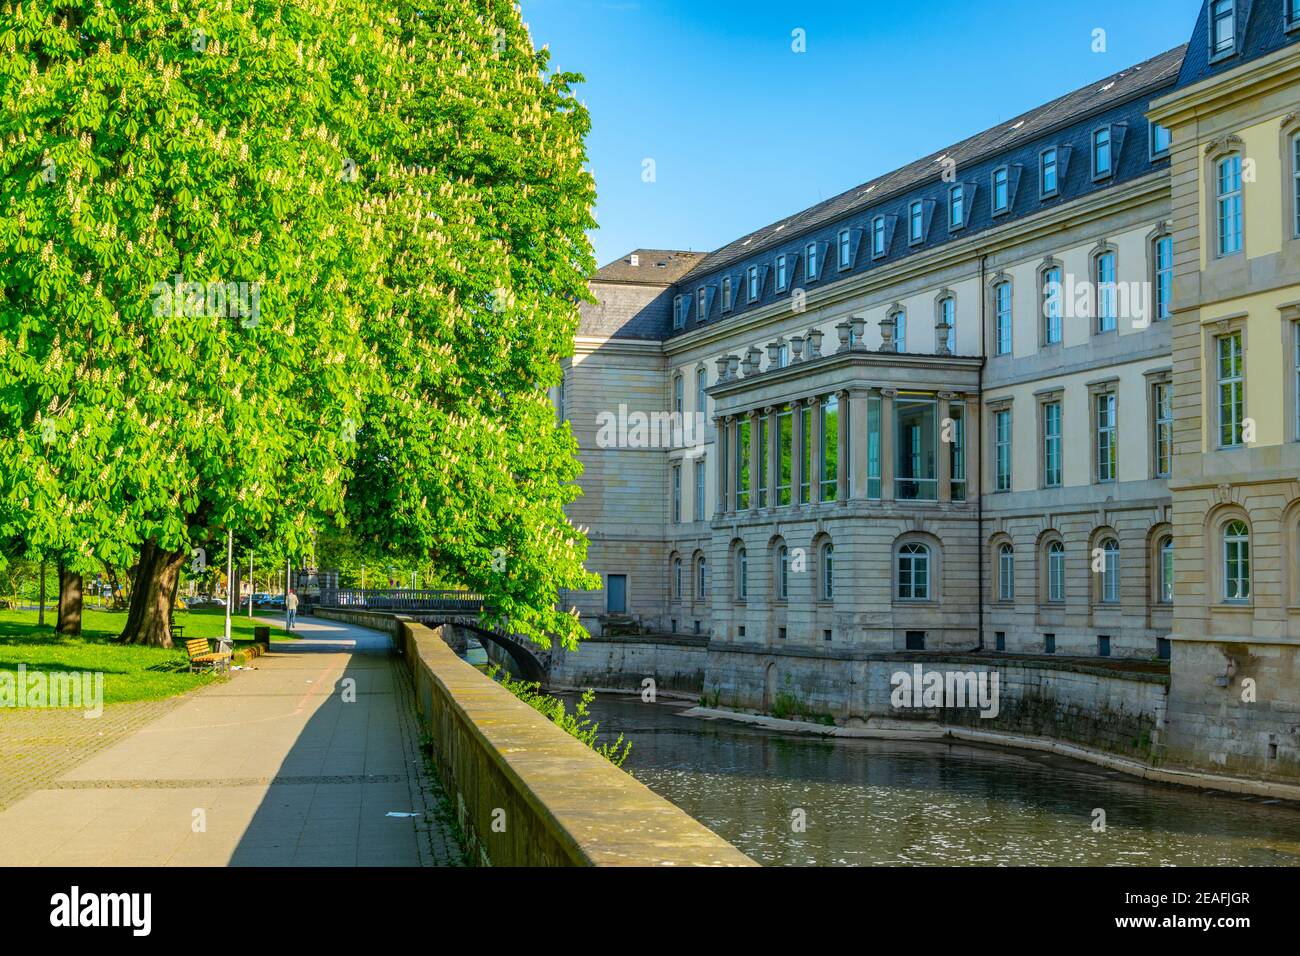 Landtag of Lower Saxony region of Germany in Hannover Stock Photo